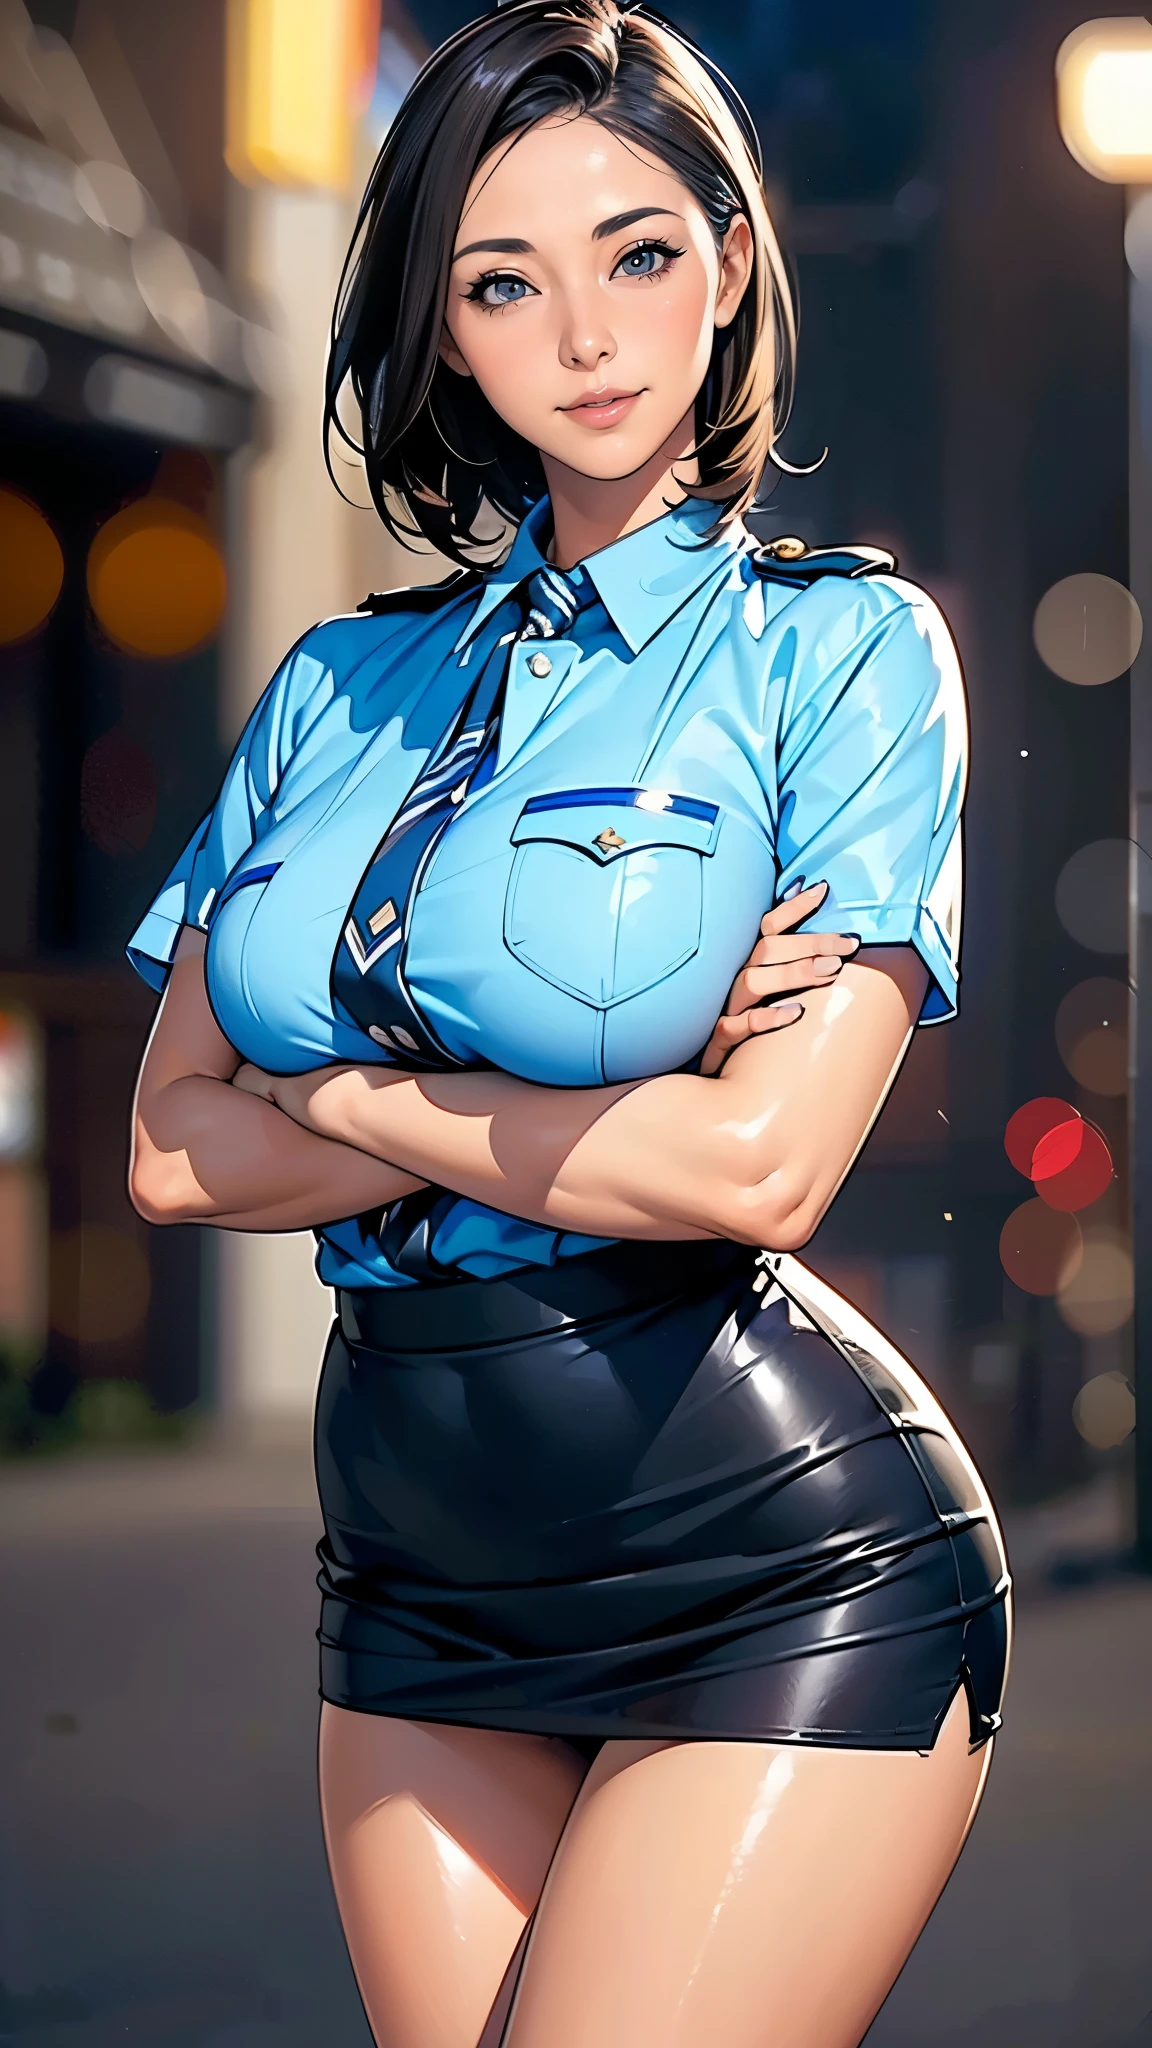 (masterpiece:1.2, highest quality), (Realistic, photoRealistic:1.4),Beautiful illustrations,(Natural Side Lighting, Cinema Lighting),1 female,Japanese,Mature Woman,Policewoman on patrol,48 years old,Perfect Face, Symmetrical face, Shiny skin,Random Hairstyles,Big eyes,Sexy Eyes,(smile),(whole body),BREAK((Police Officer Shirt)),((Tight mini skirt)),(The background is a street corner:1.5),(((Background Blur:1.5))),((police uniform)),(((Crossed arms)))